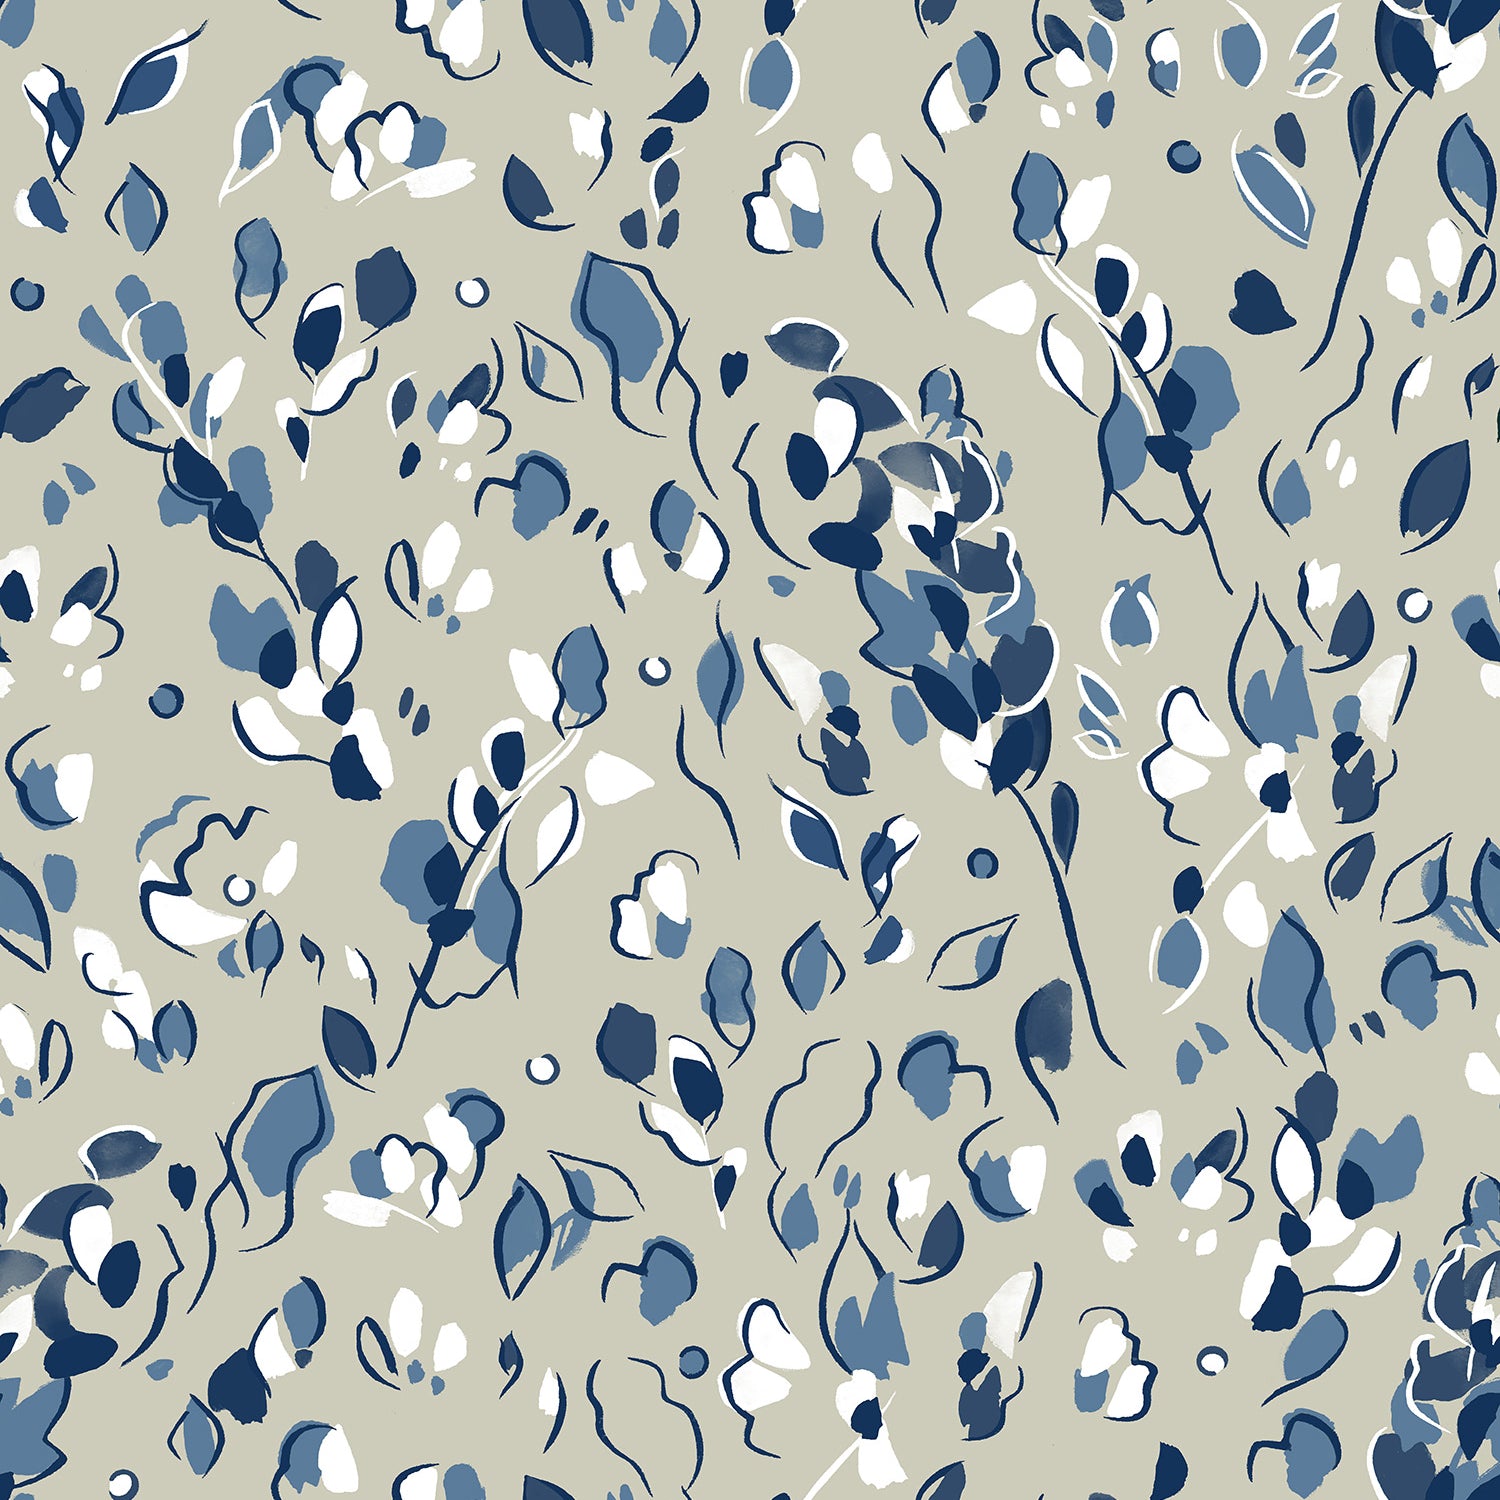 Detail of fabric in a painterly leaf print in shades of white, blue and navy on a tan field.